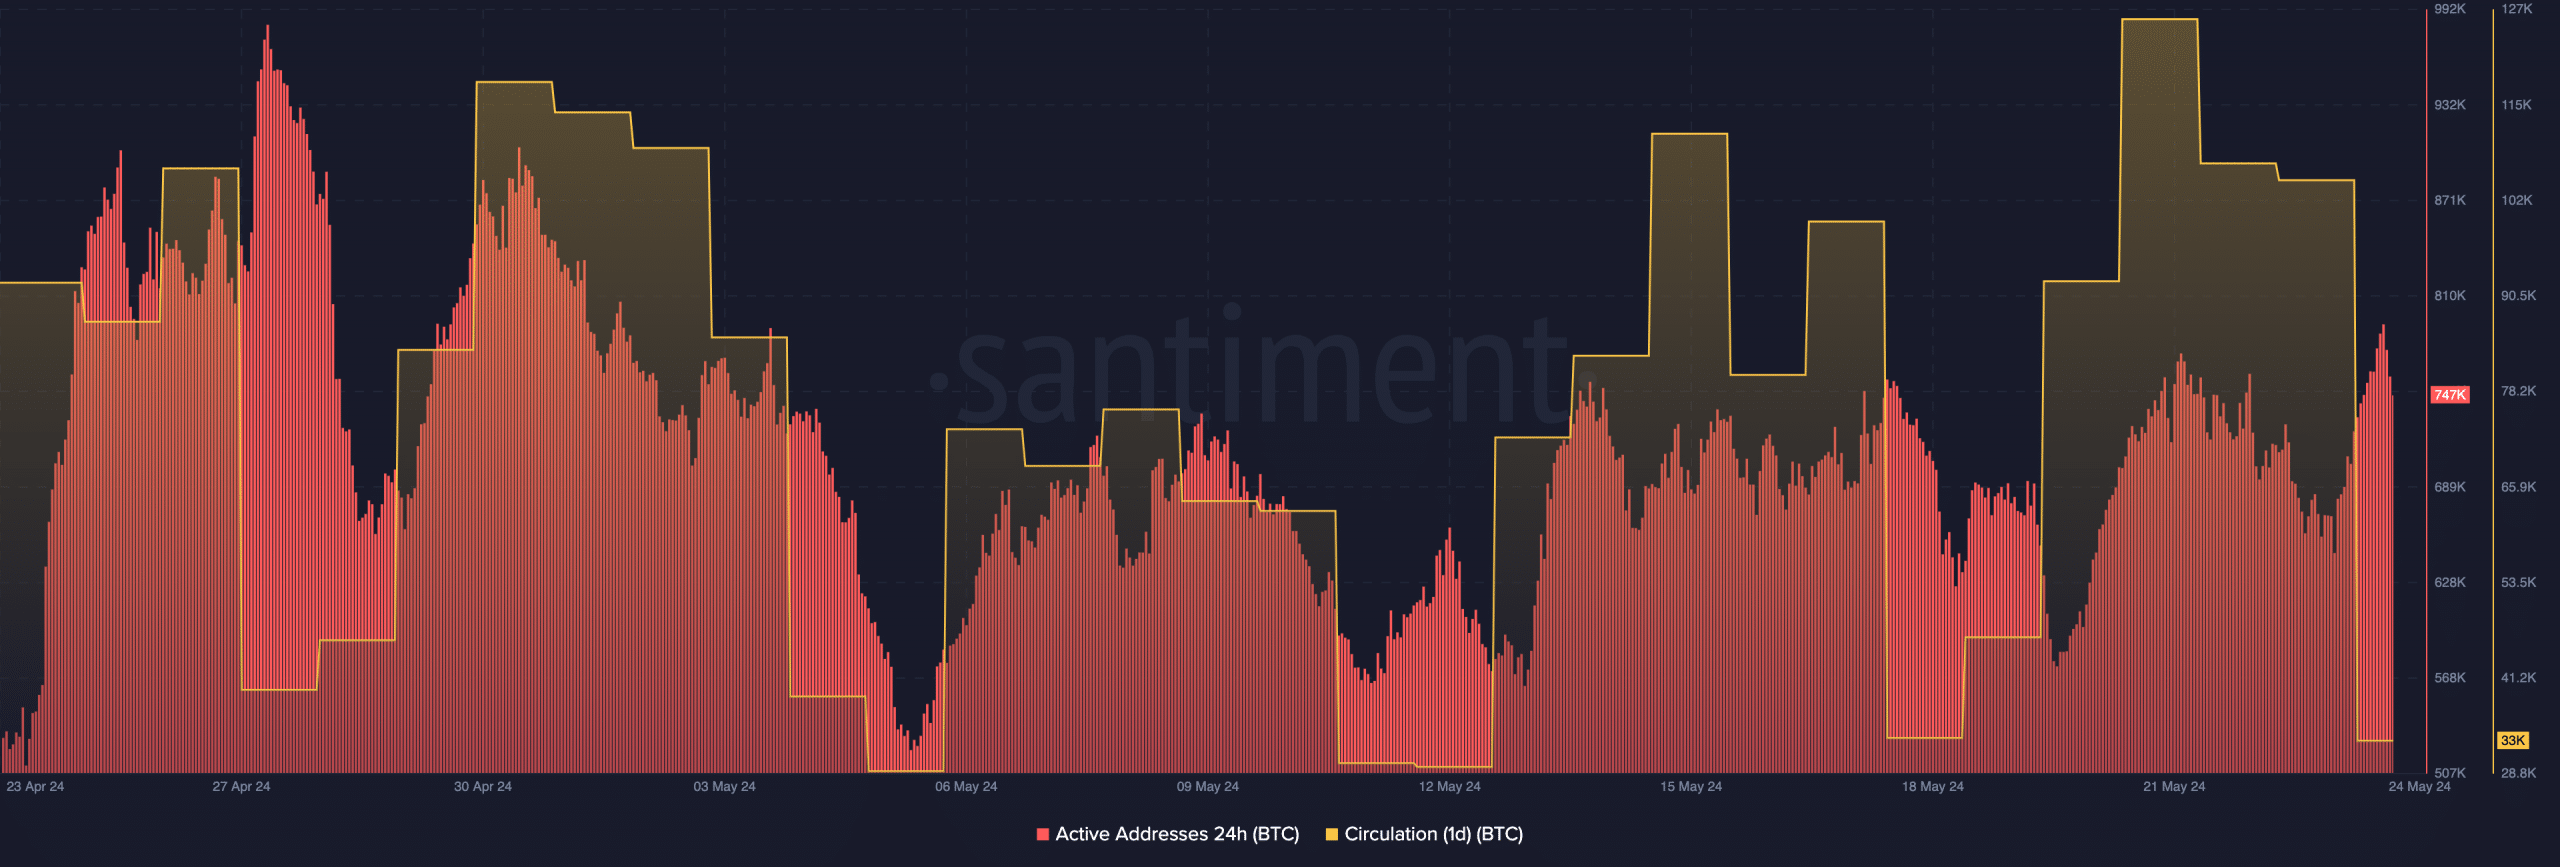 Activity on the Bitcoin network increases